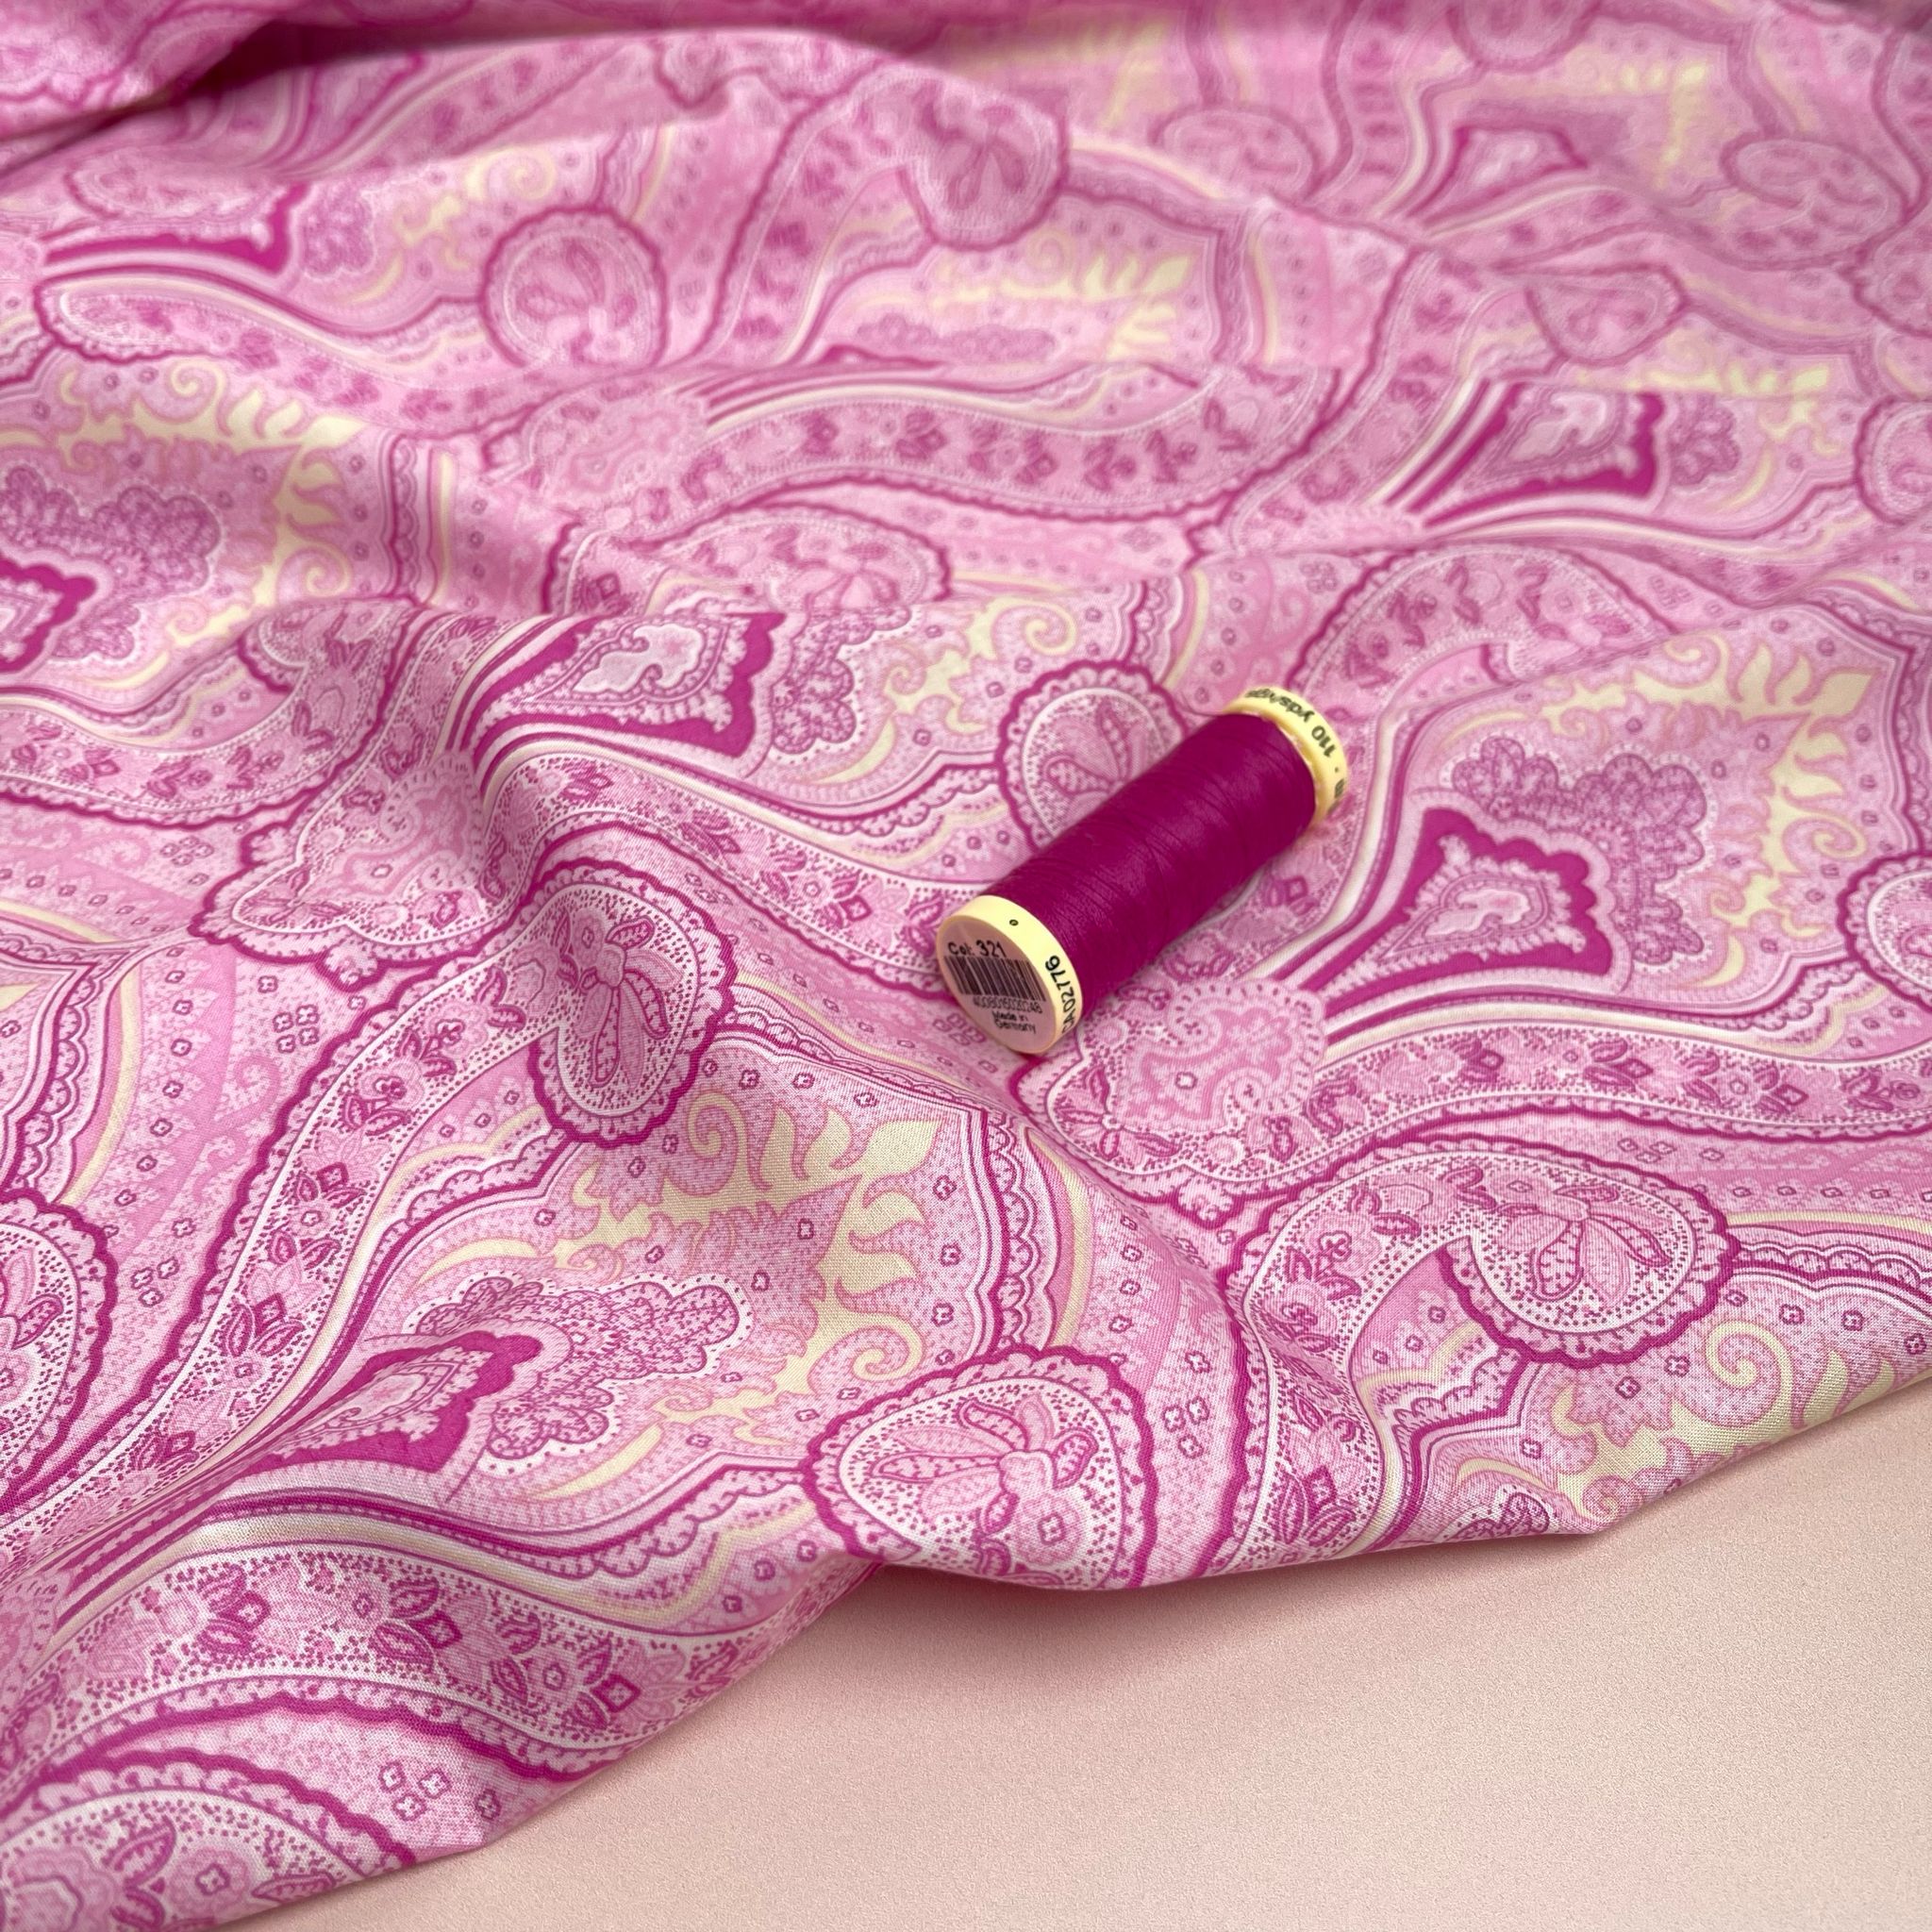 Pink Paisley Cotton Lawn Fabric